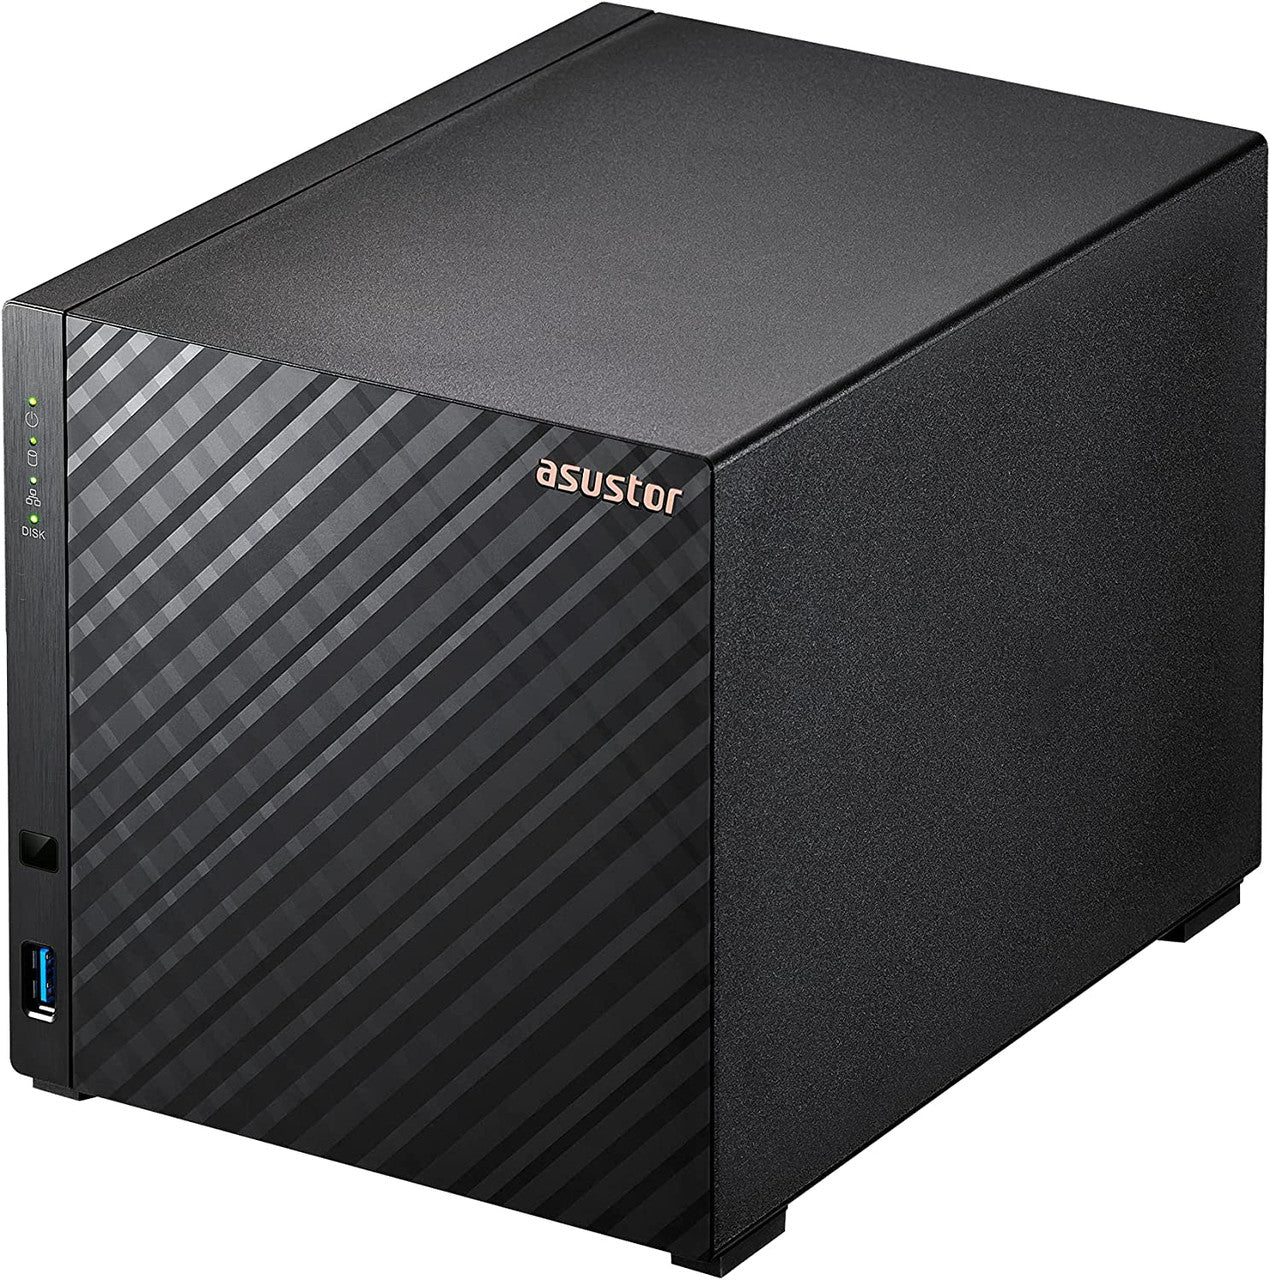 Asustor AS1104T 4-Bay Drivestor 4 NAS with 1GB RAM and 80TB (4x20TB) Western Digital RED PRO Drives